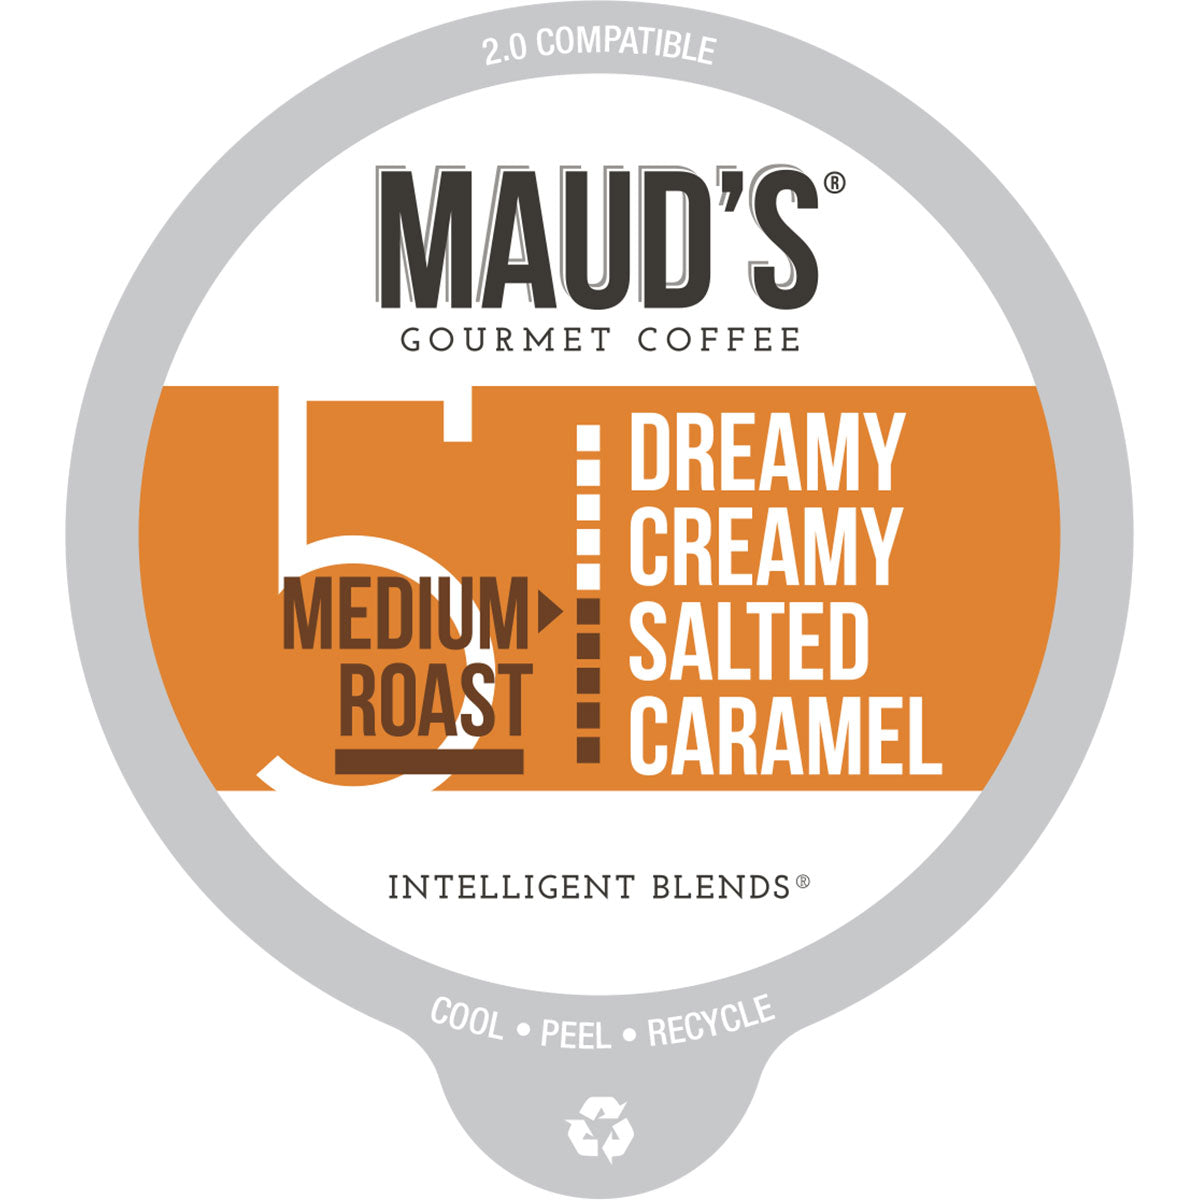 Maud's Salted Caramel Flavored Coffee Pods (Dreamy Creamy Salted Caramel) - 24ct